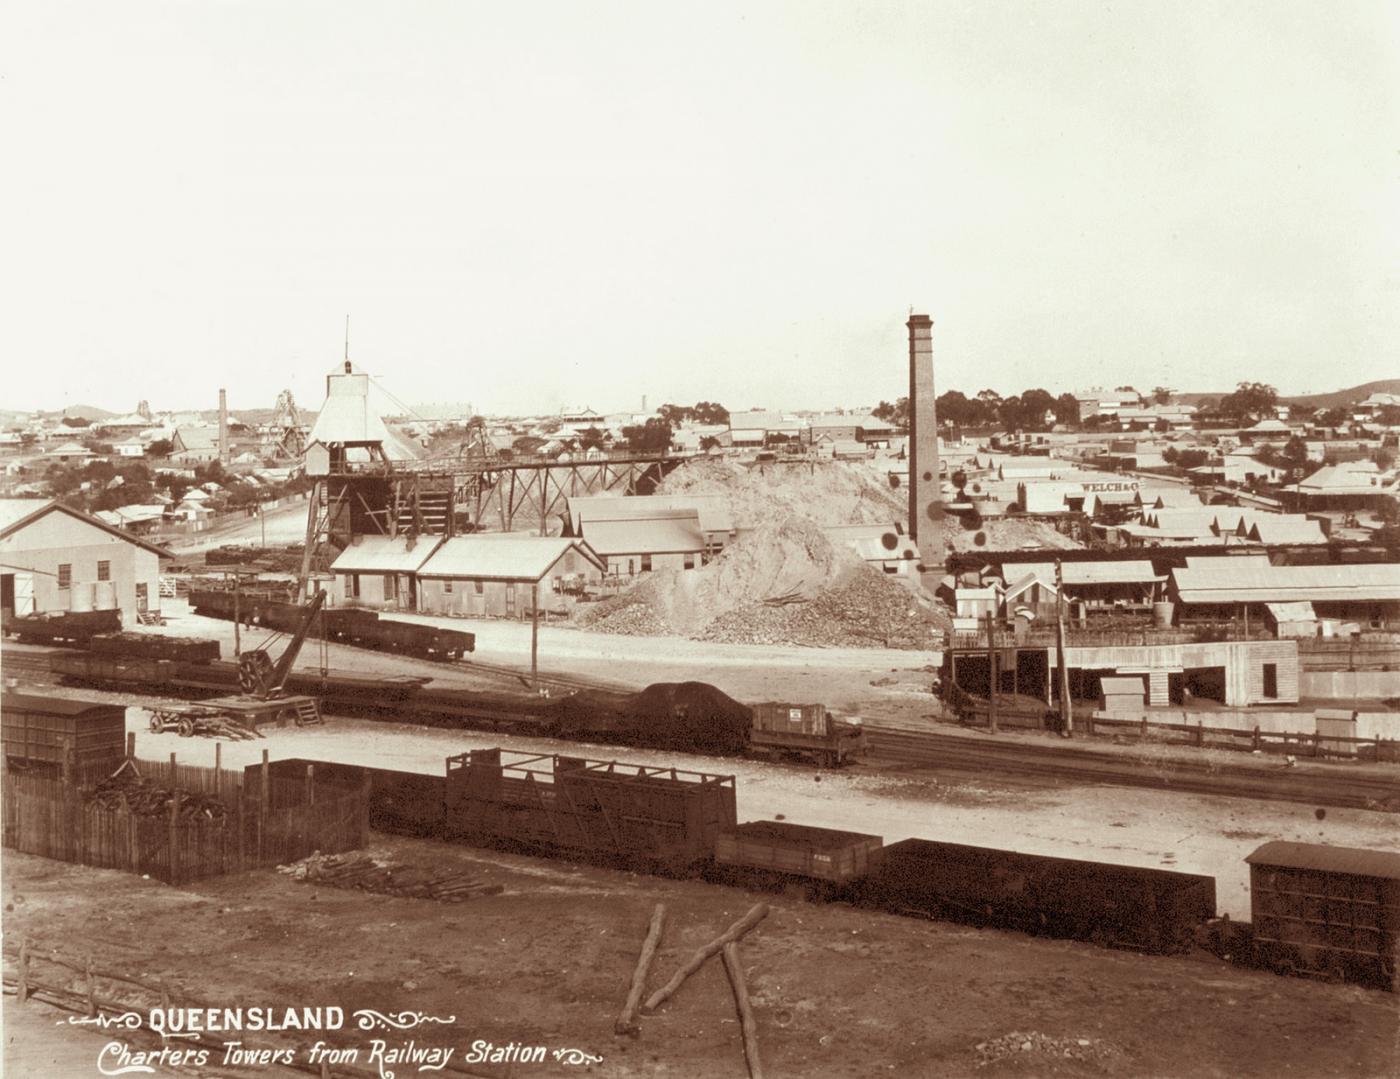 Sweeping view over the 19th century layout of Charters Towers, showing the rooftops of the town's houses